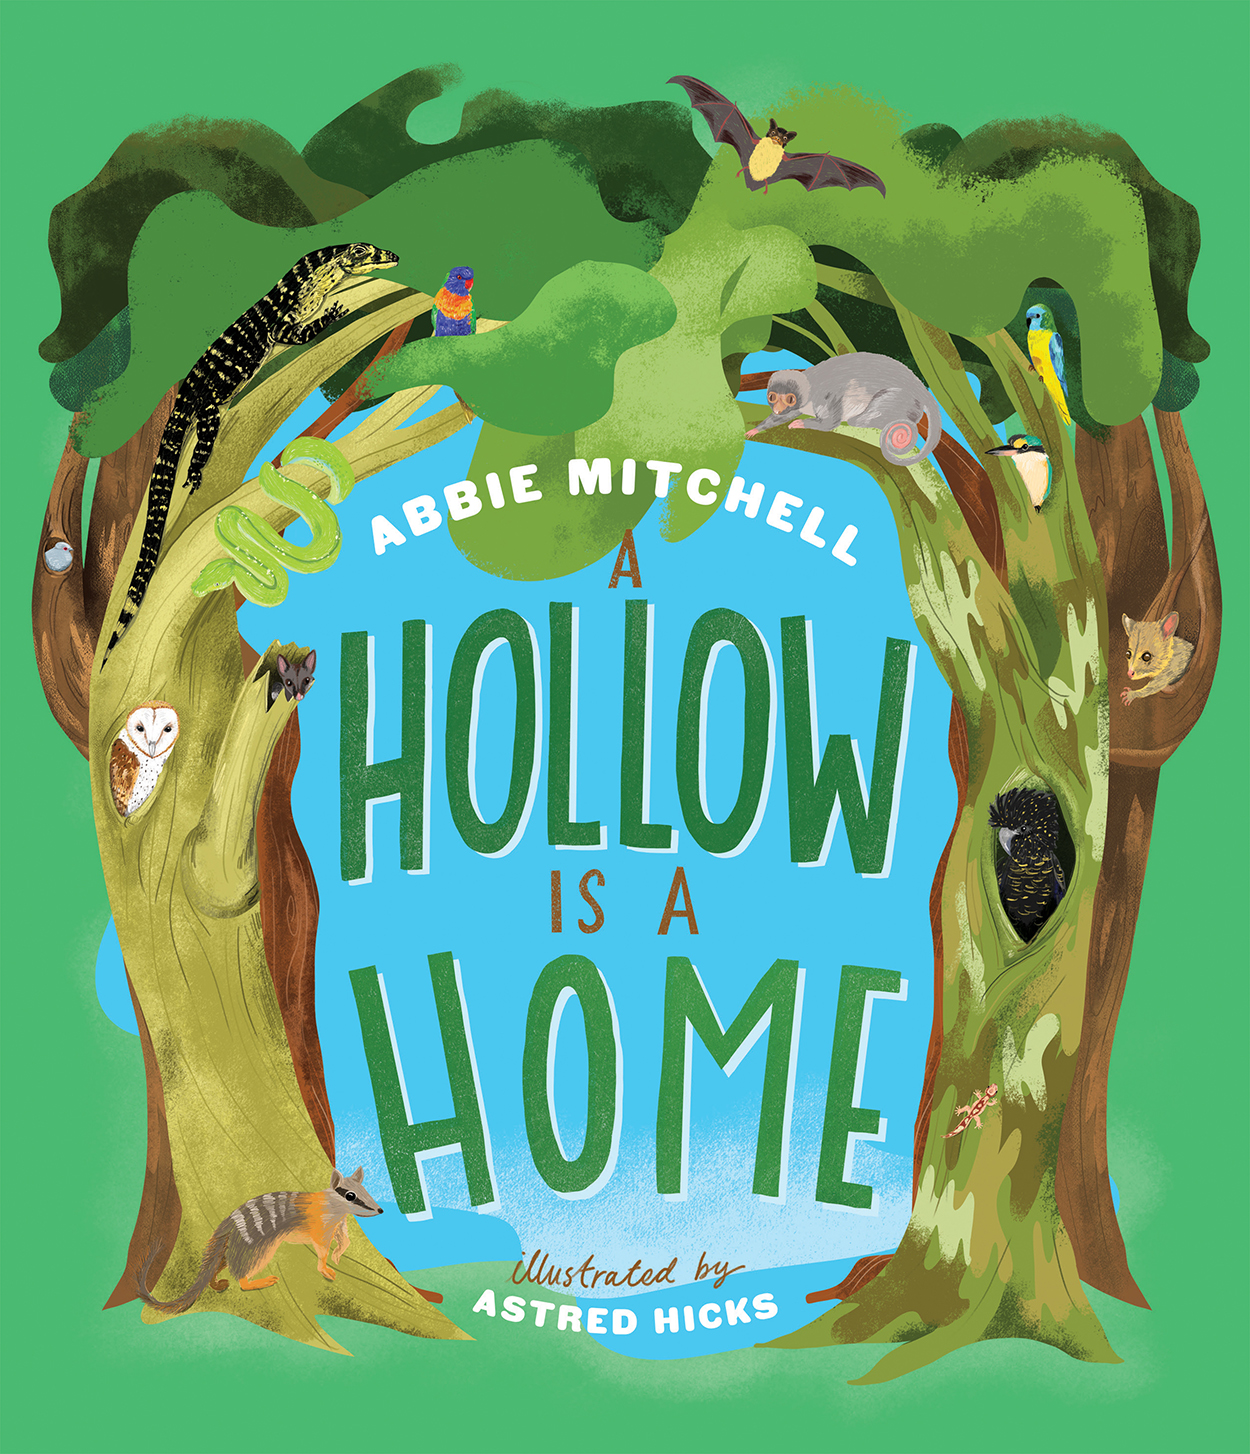 A Hollow is a Home, book cover